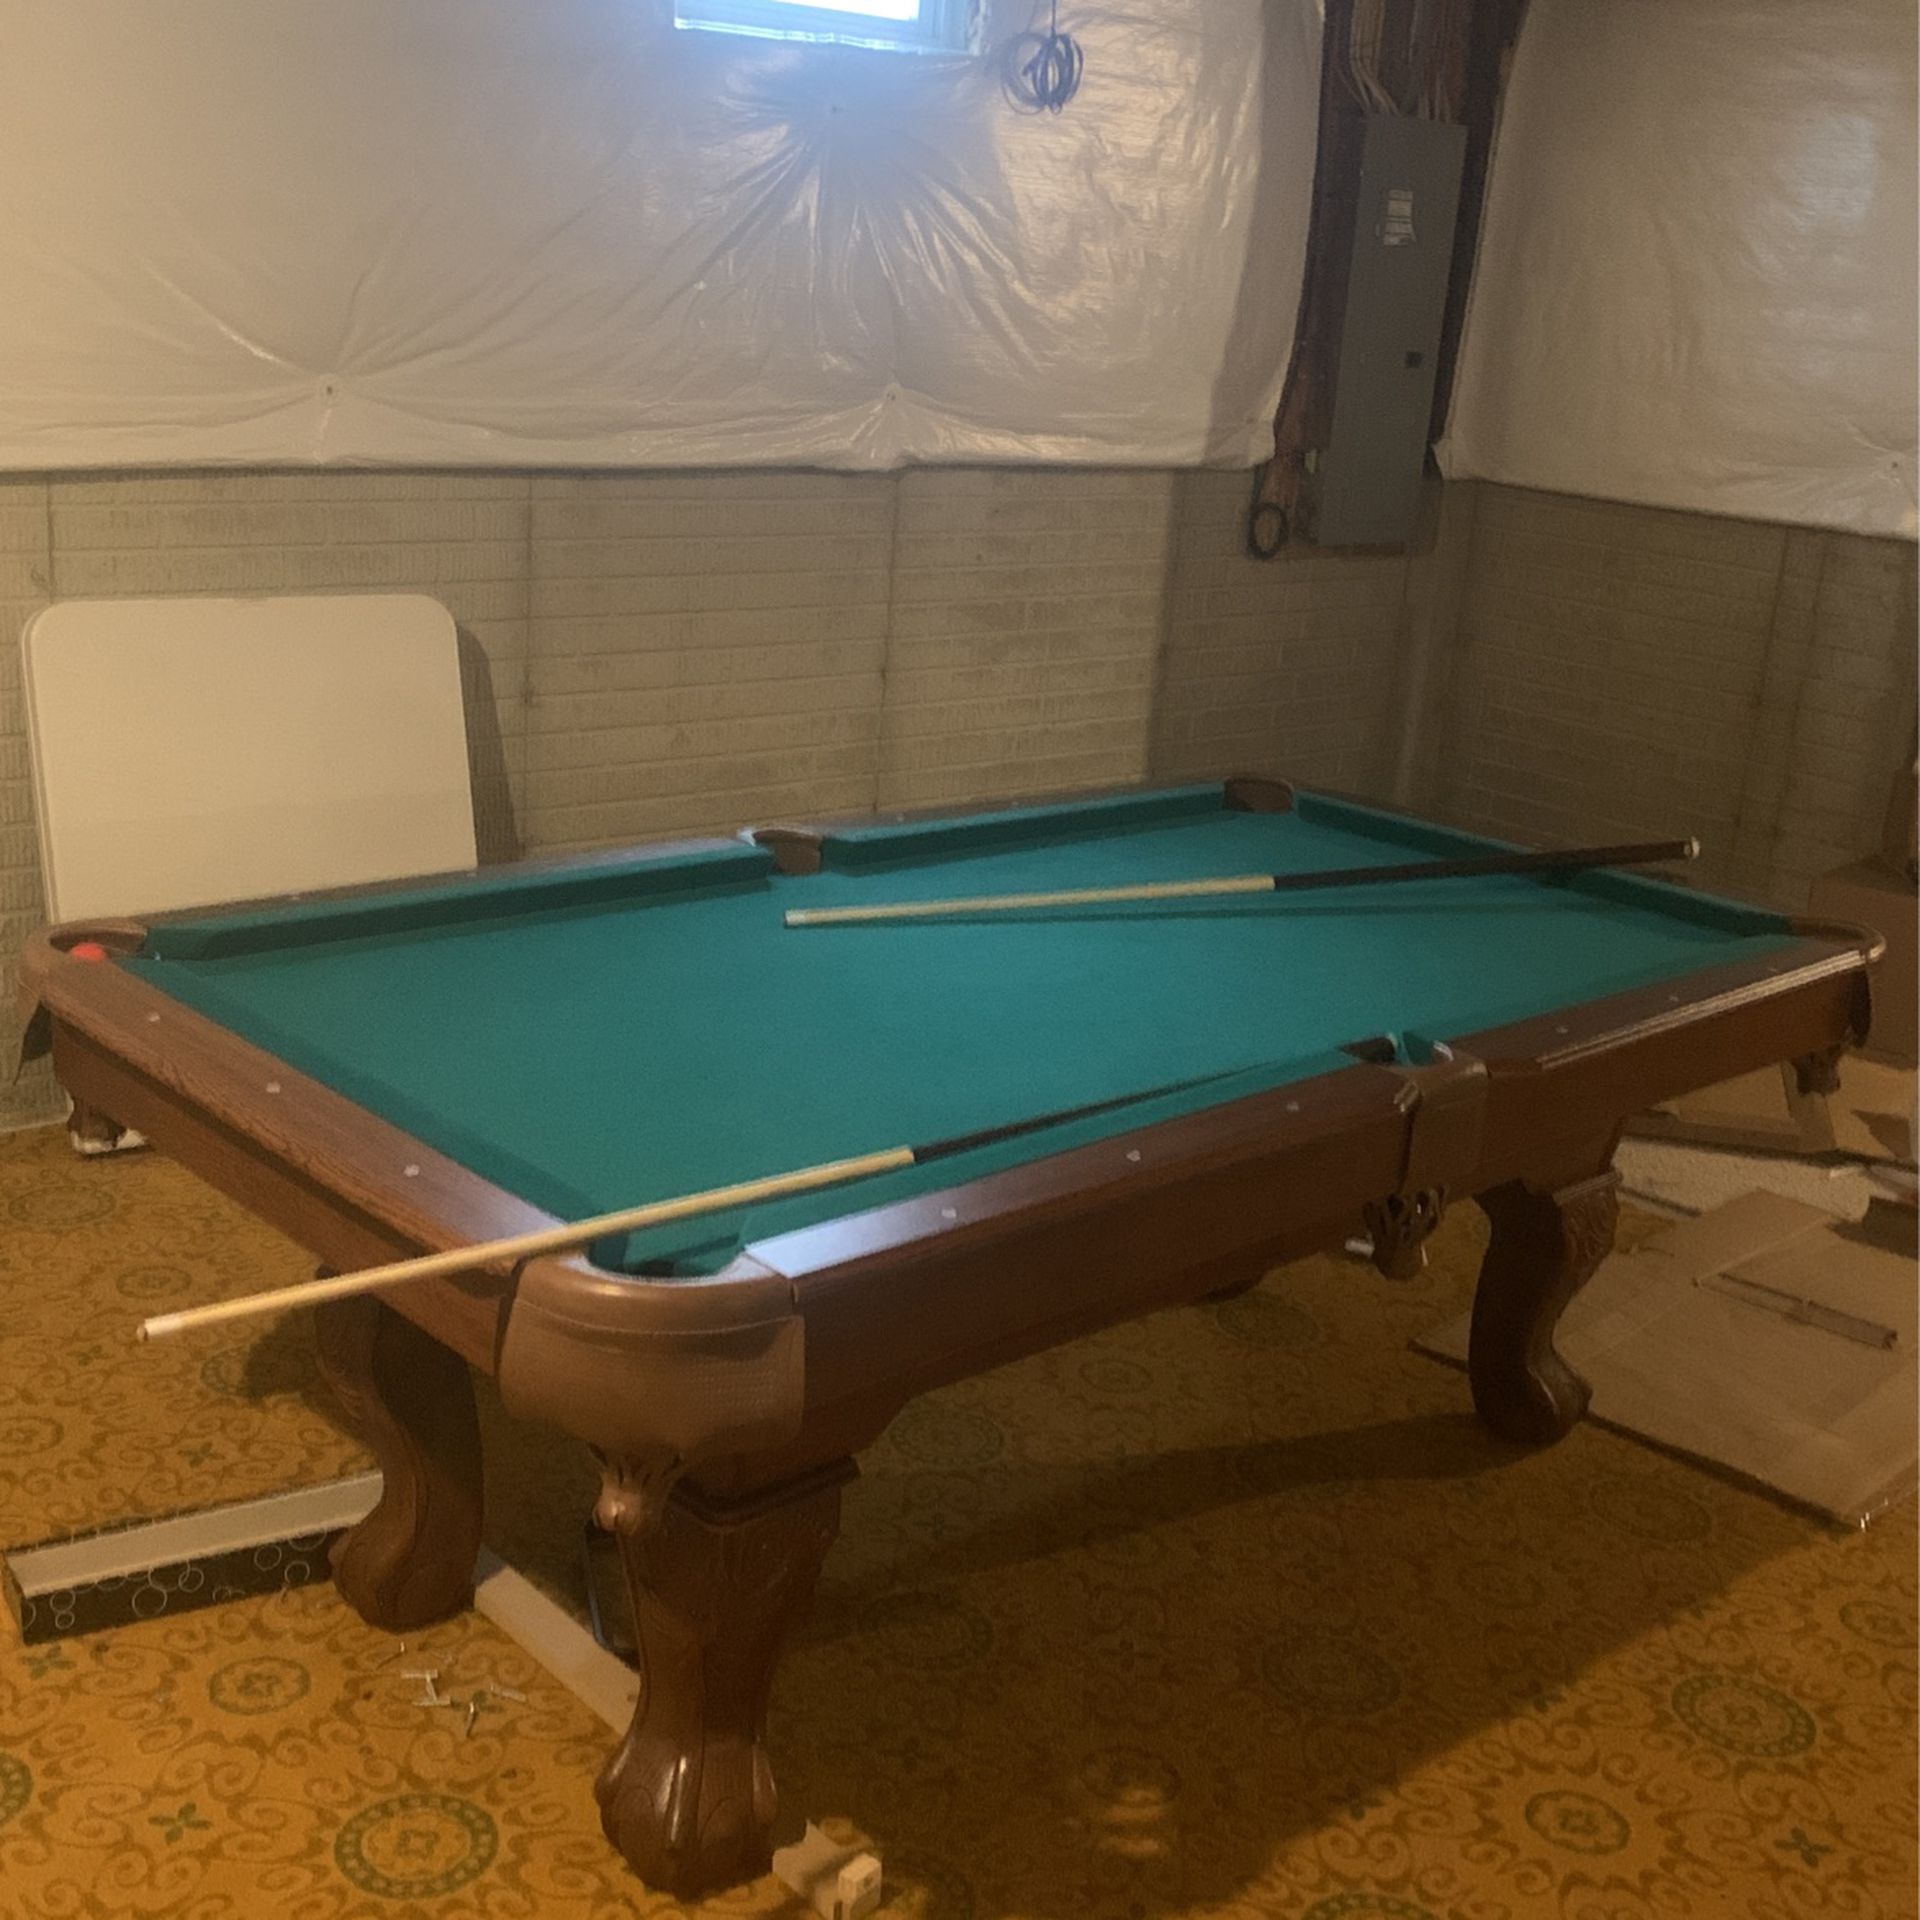 Approx 80” Pool table. Opened but just as new